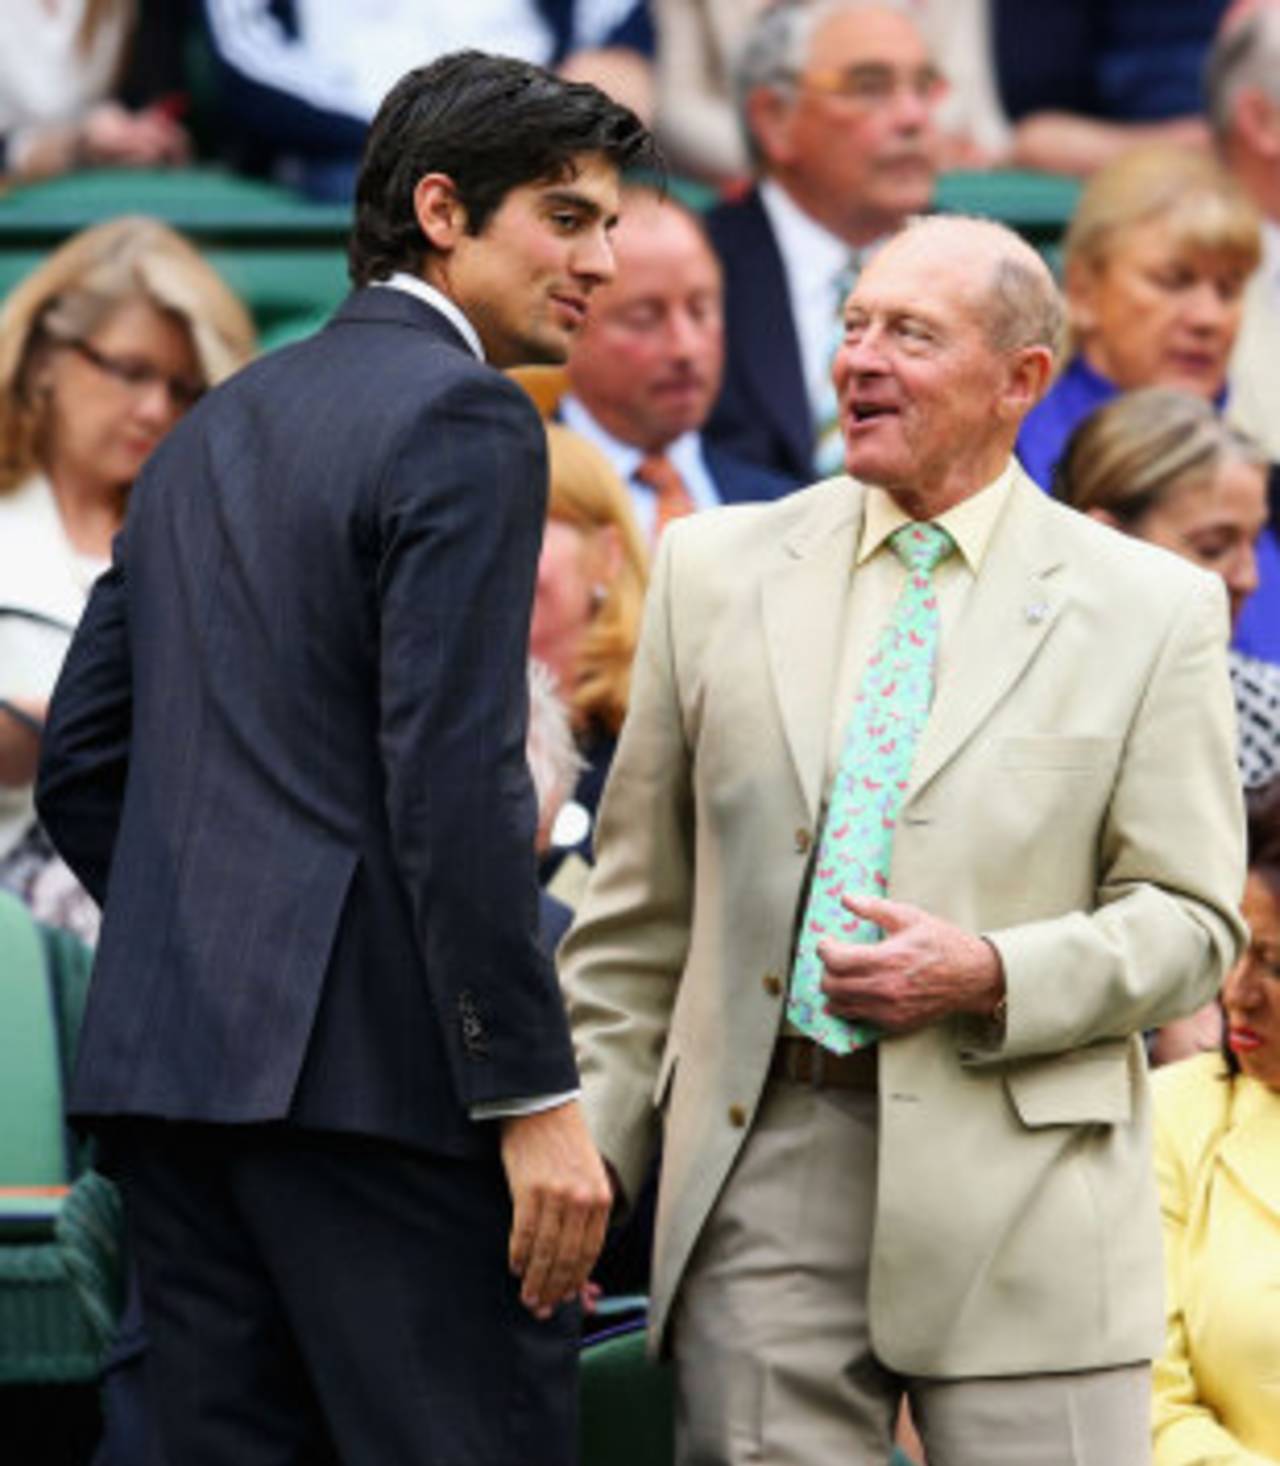 Alastair Cook and Geoffrey Boycott in the Royal Box at Wimbledon, London, June 28, 2013